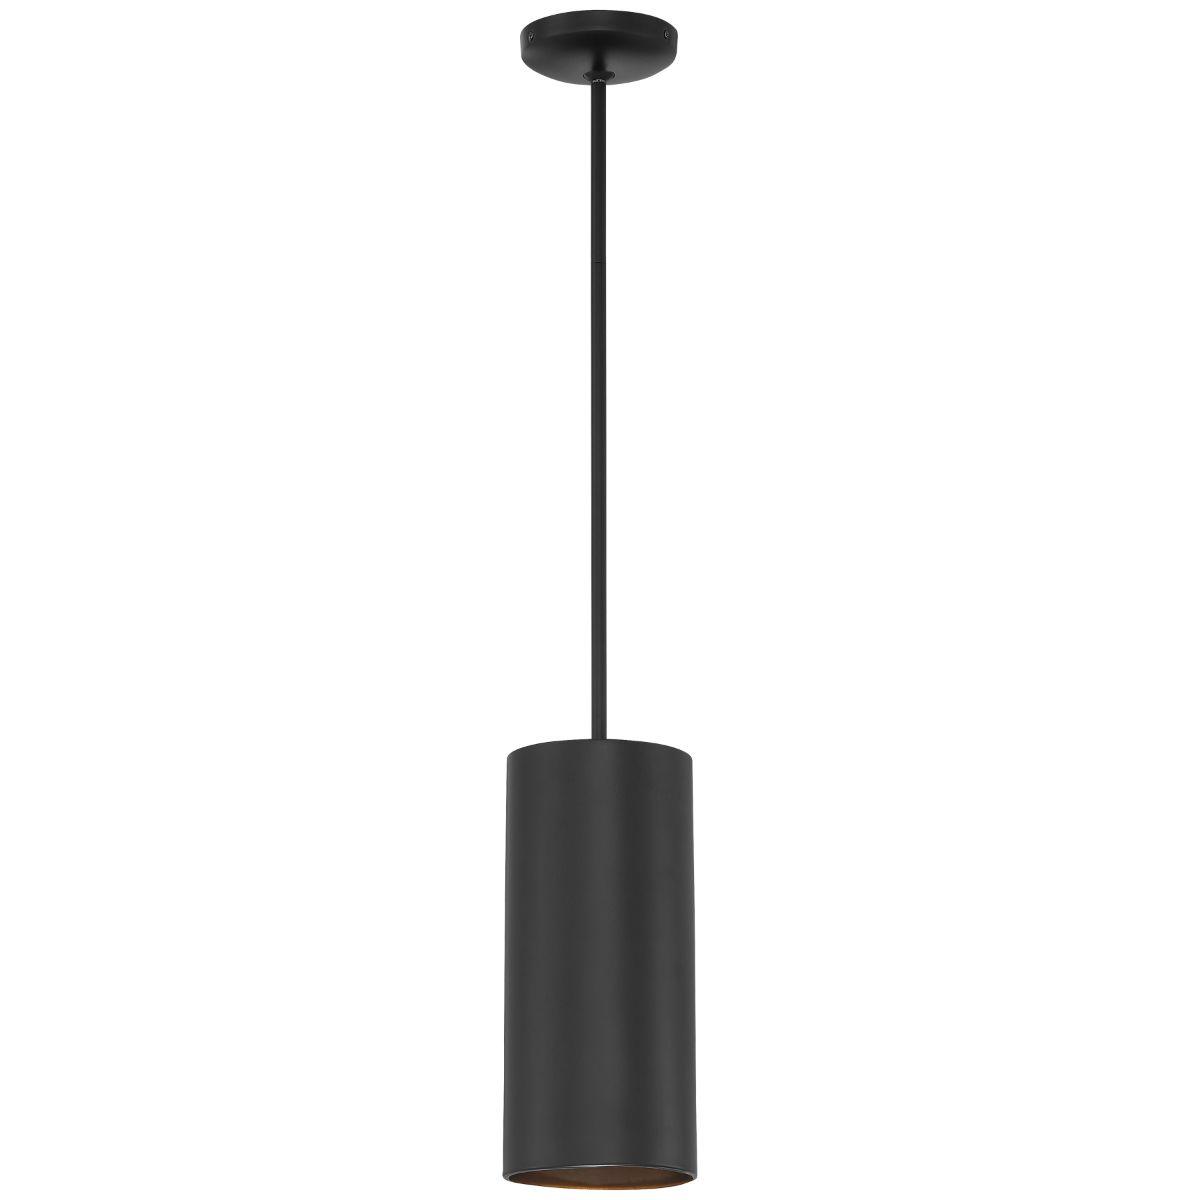 Pilson XL 11 in. LED Pendant Light with Rod